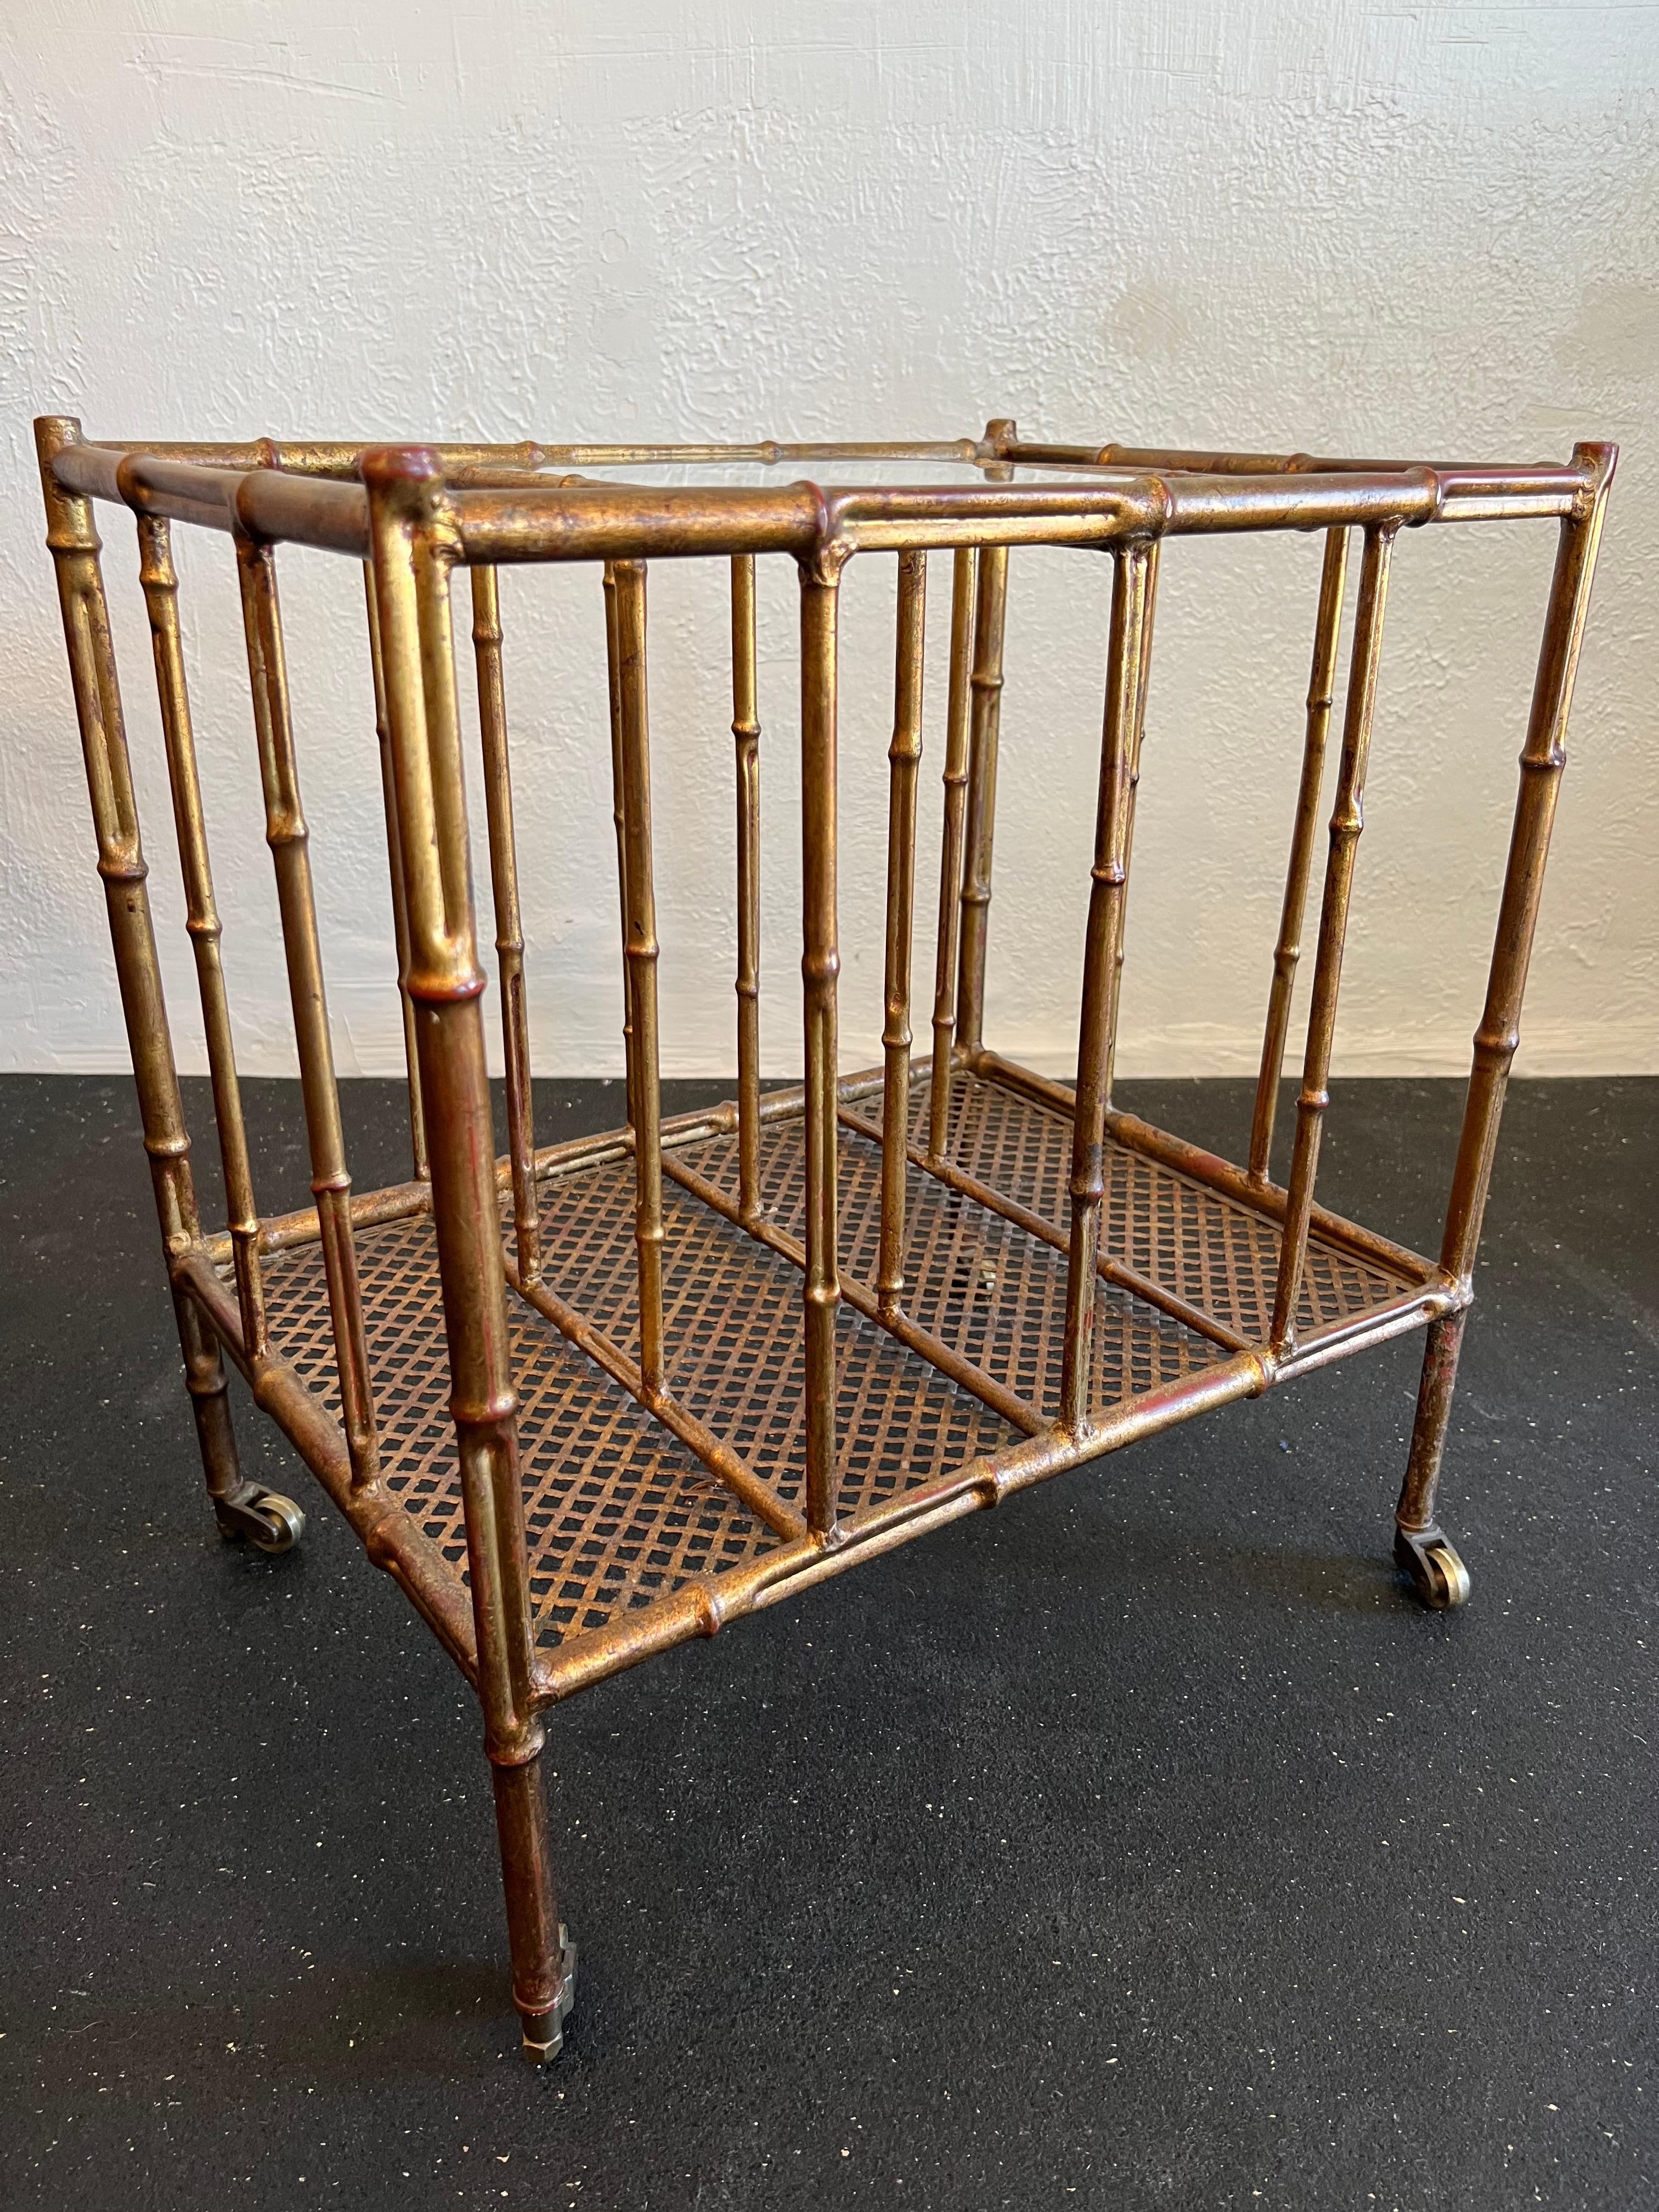 Italian gold gilded faux bamboo magazine rack table. Table is on solid brass castors for easy placement. No chips or cracks to glass insert but does show signs of wear. 

Would work well in a variety of interiors such as modern, mid century